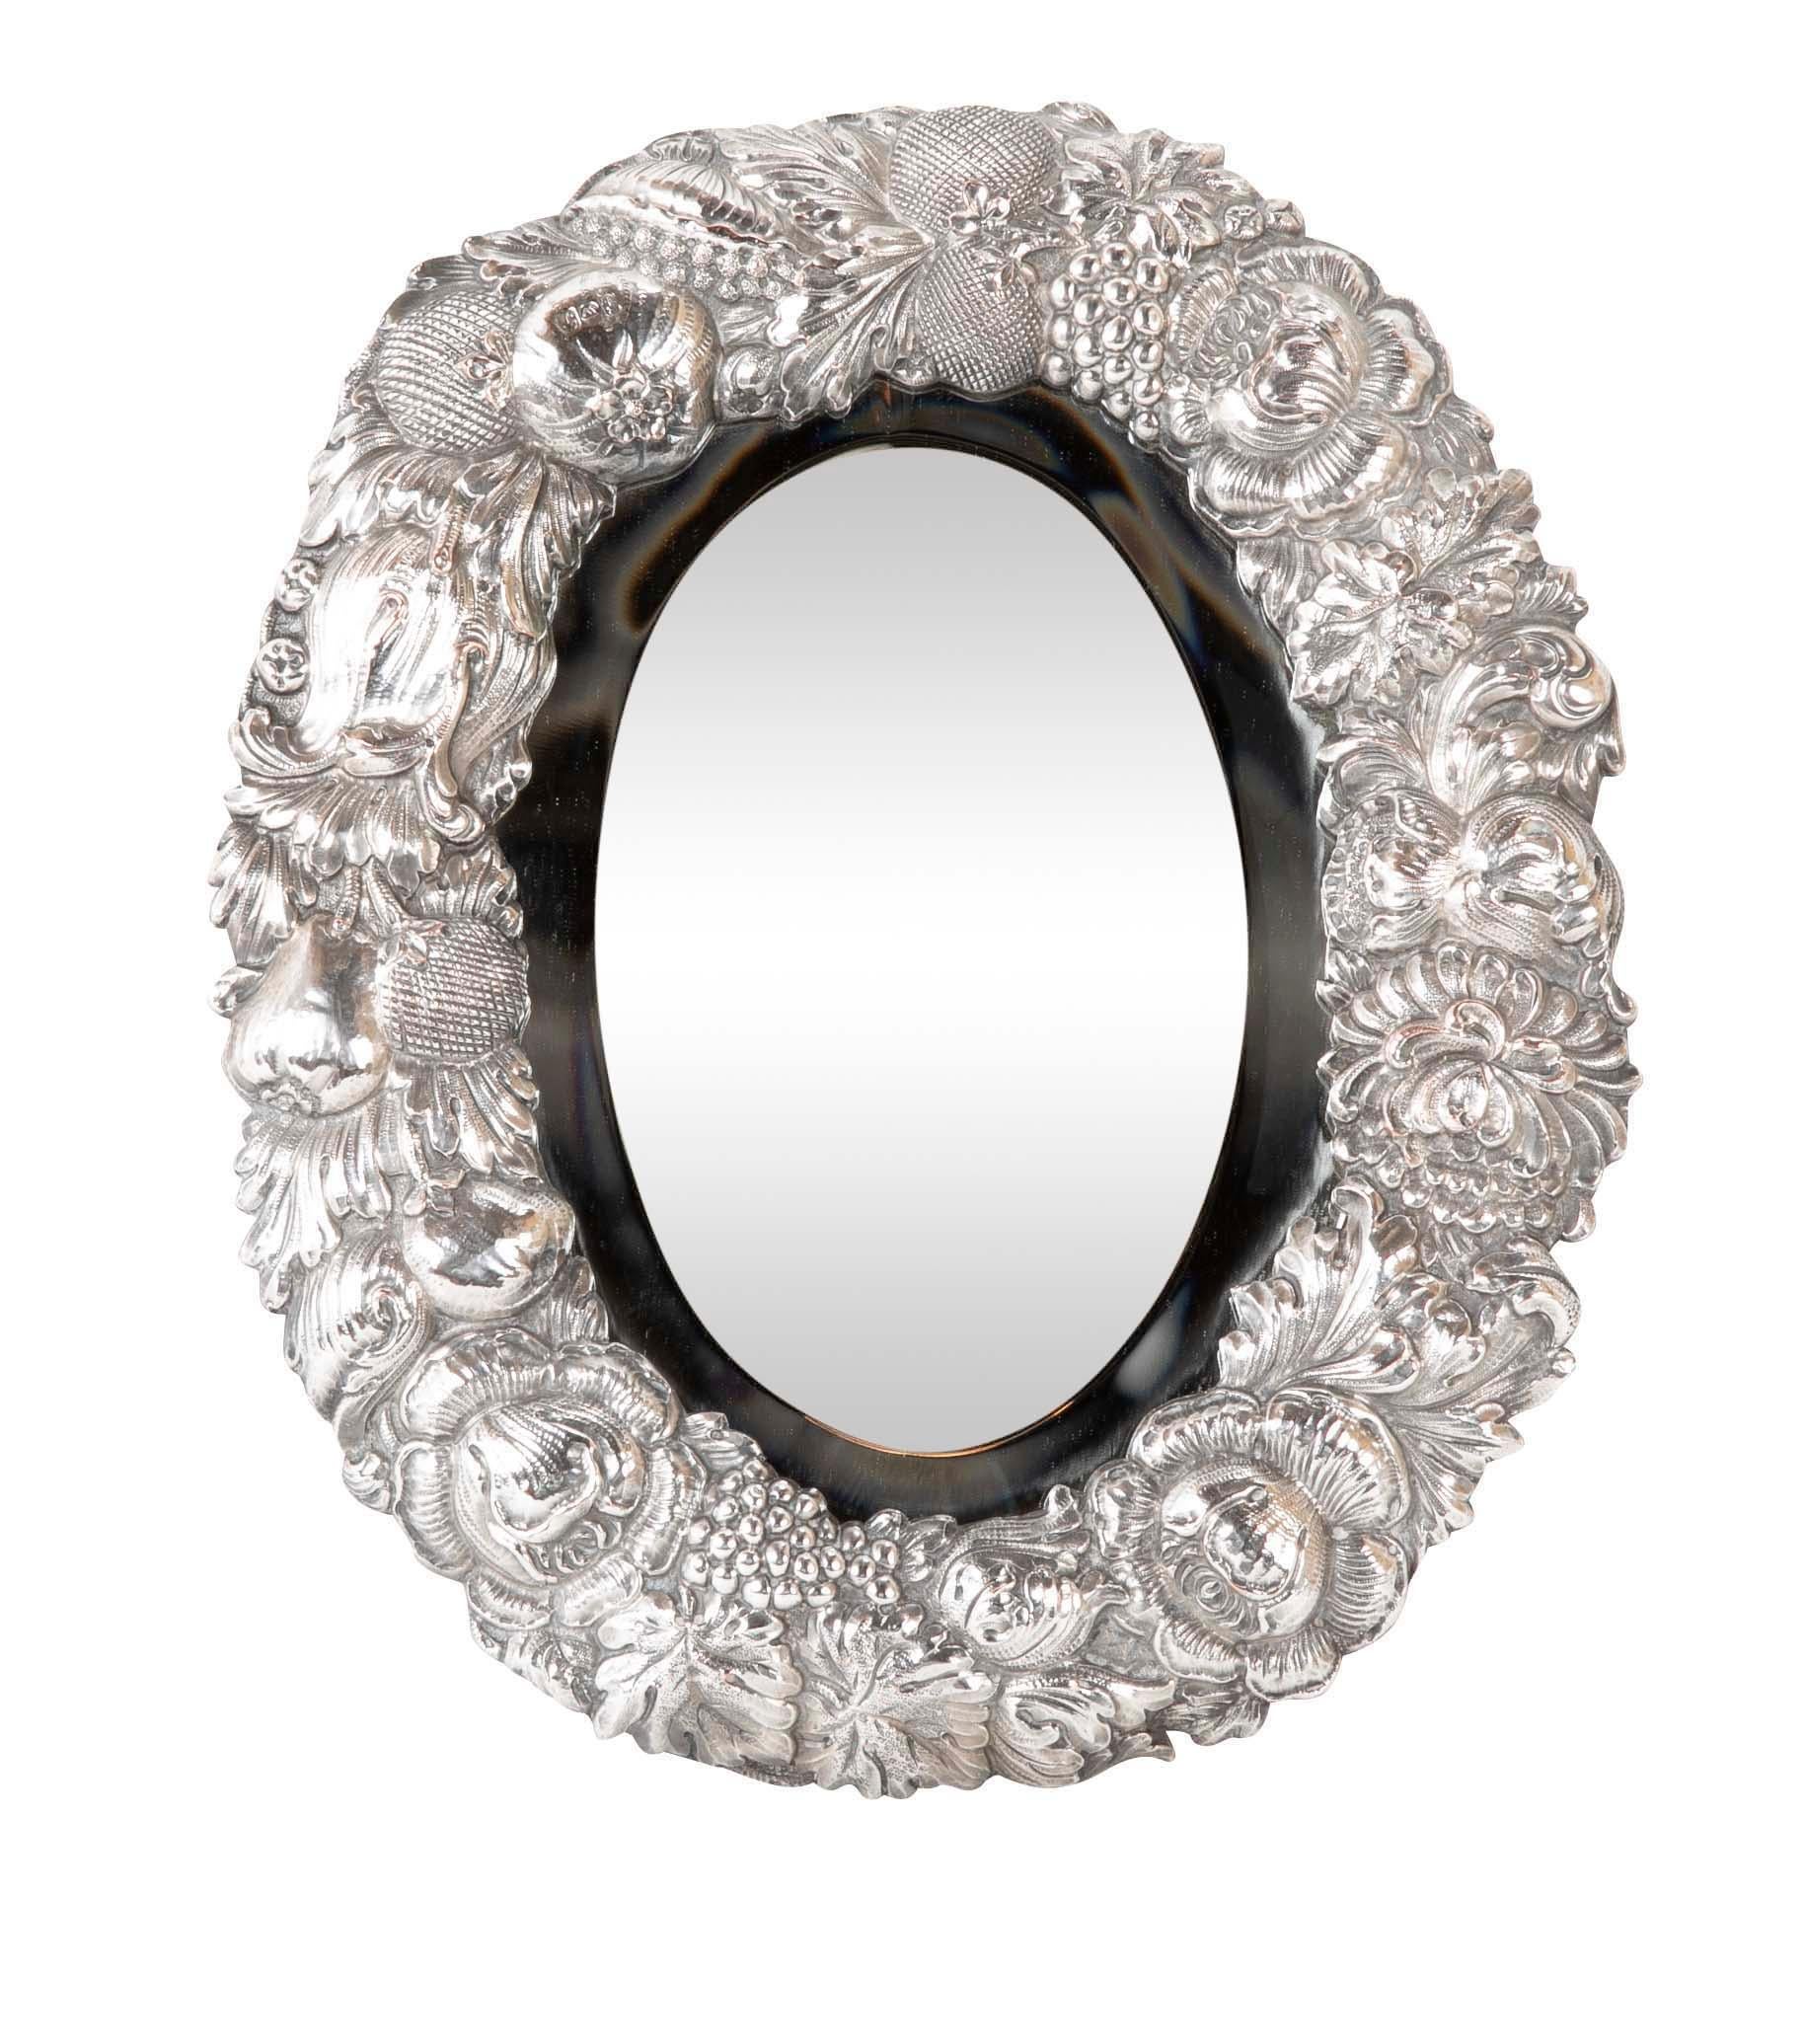 19th Century English Silver Plated Oval Table Mirror For Sale 5